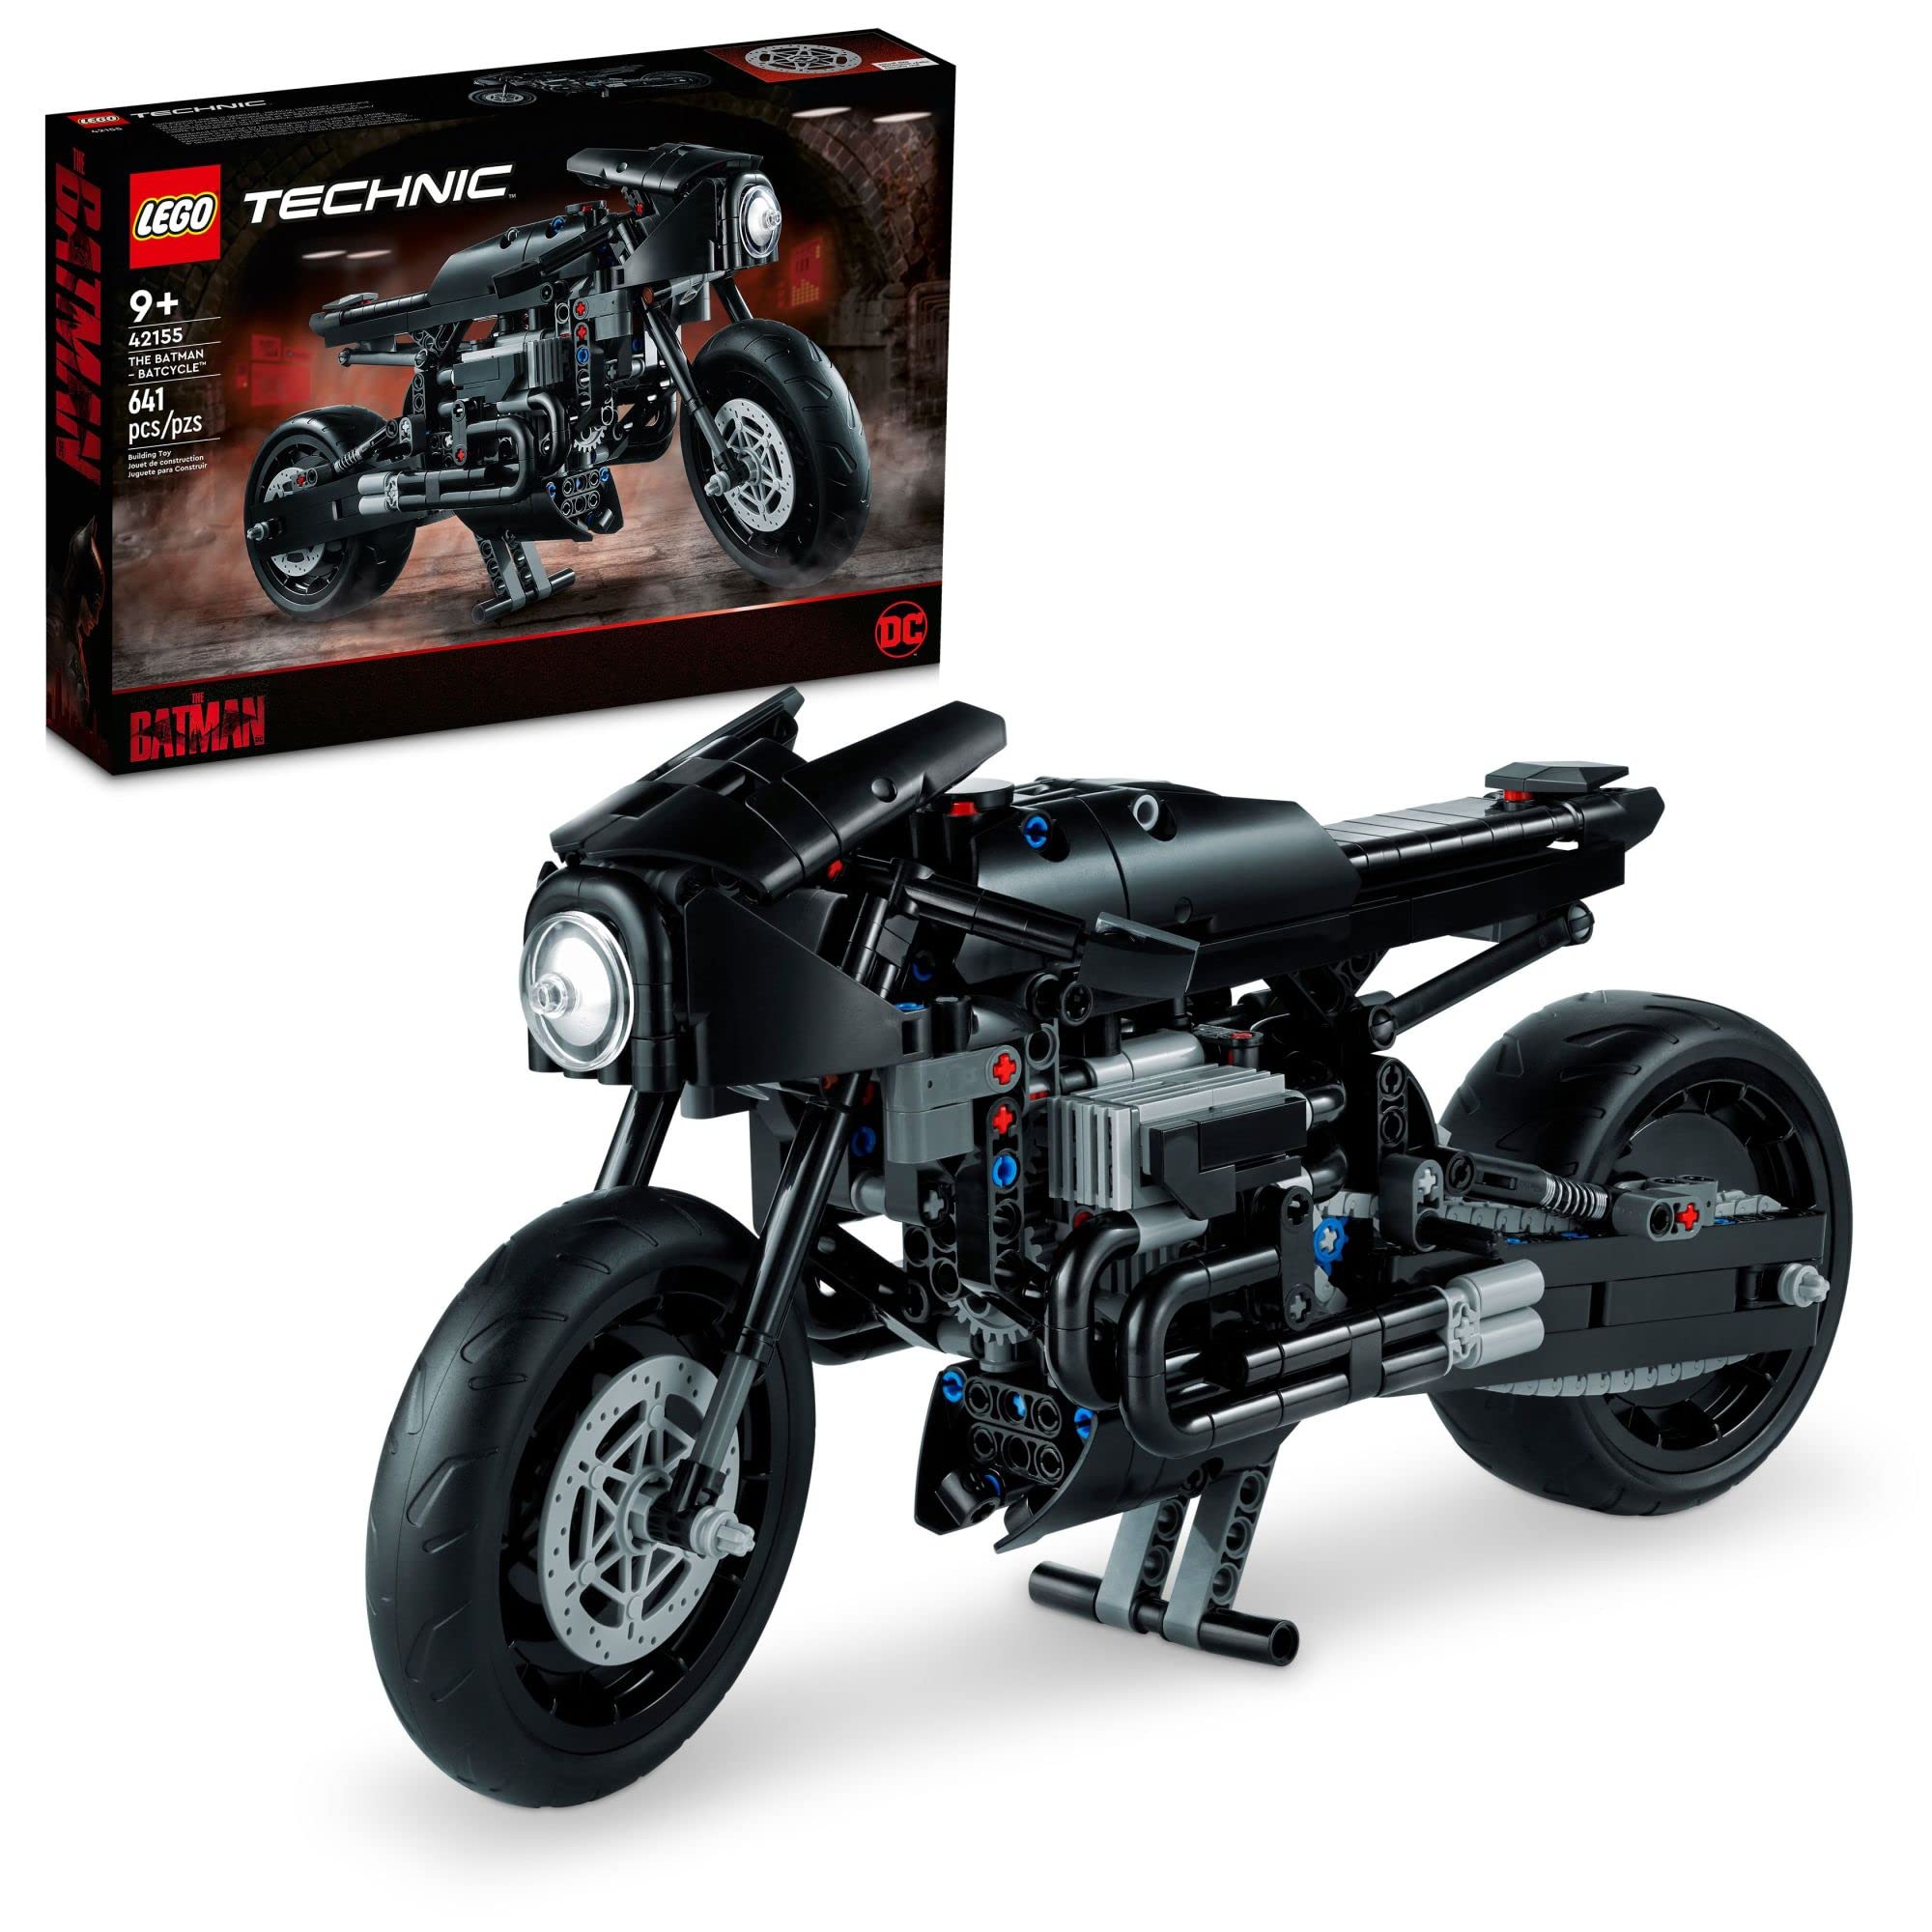 LEGO Technic The Batman – BATCYCLE Set 42155, Collectible Toy Motorcycle, Scale Model Building Kit of The Iconic Super Hero Bike from 2022 Movie